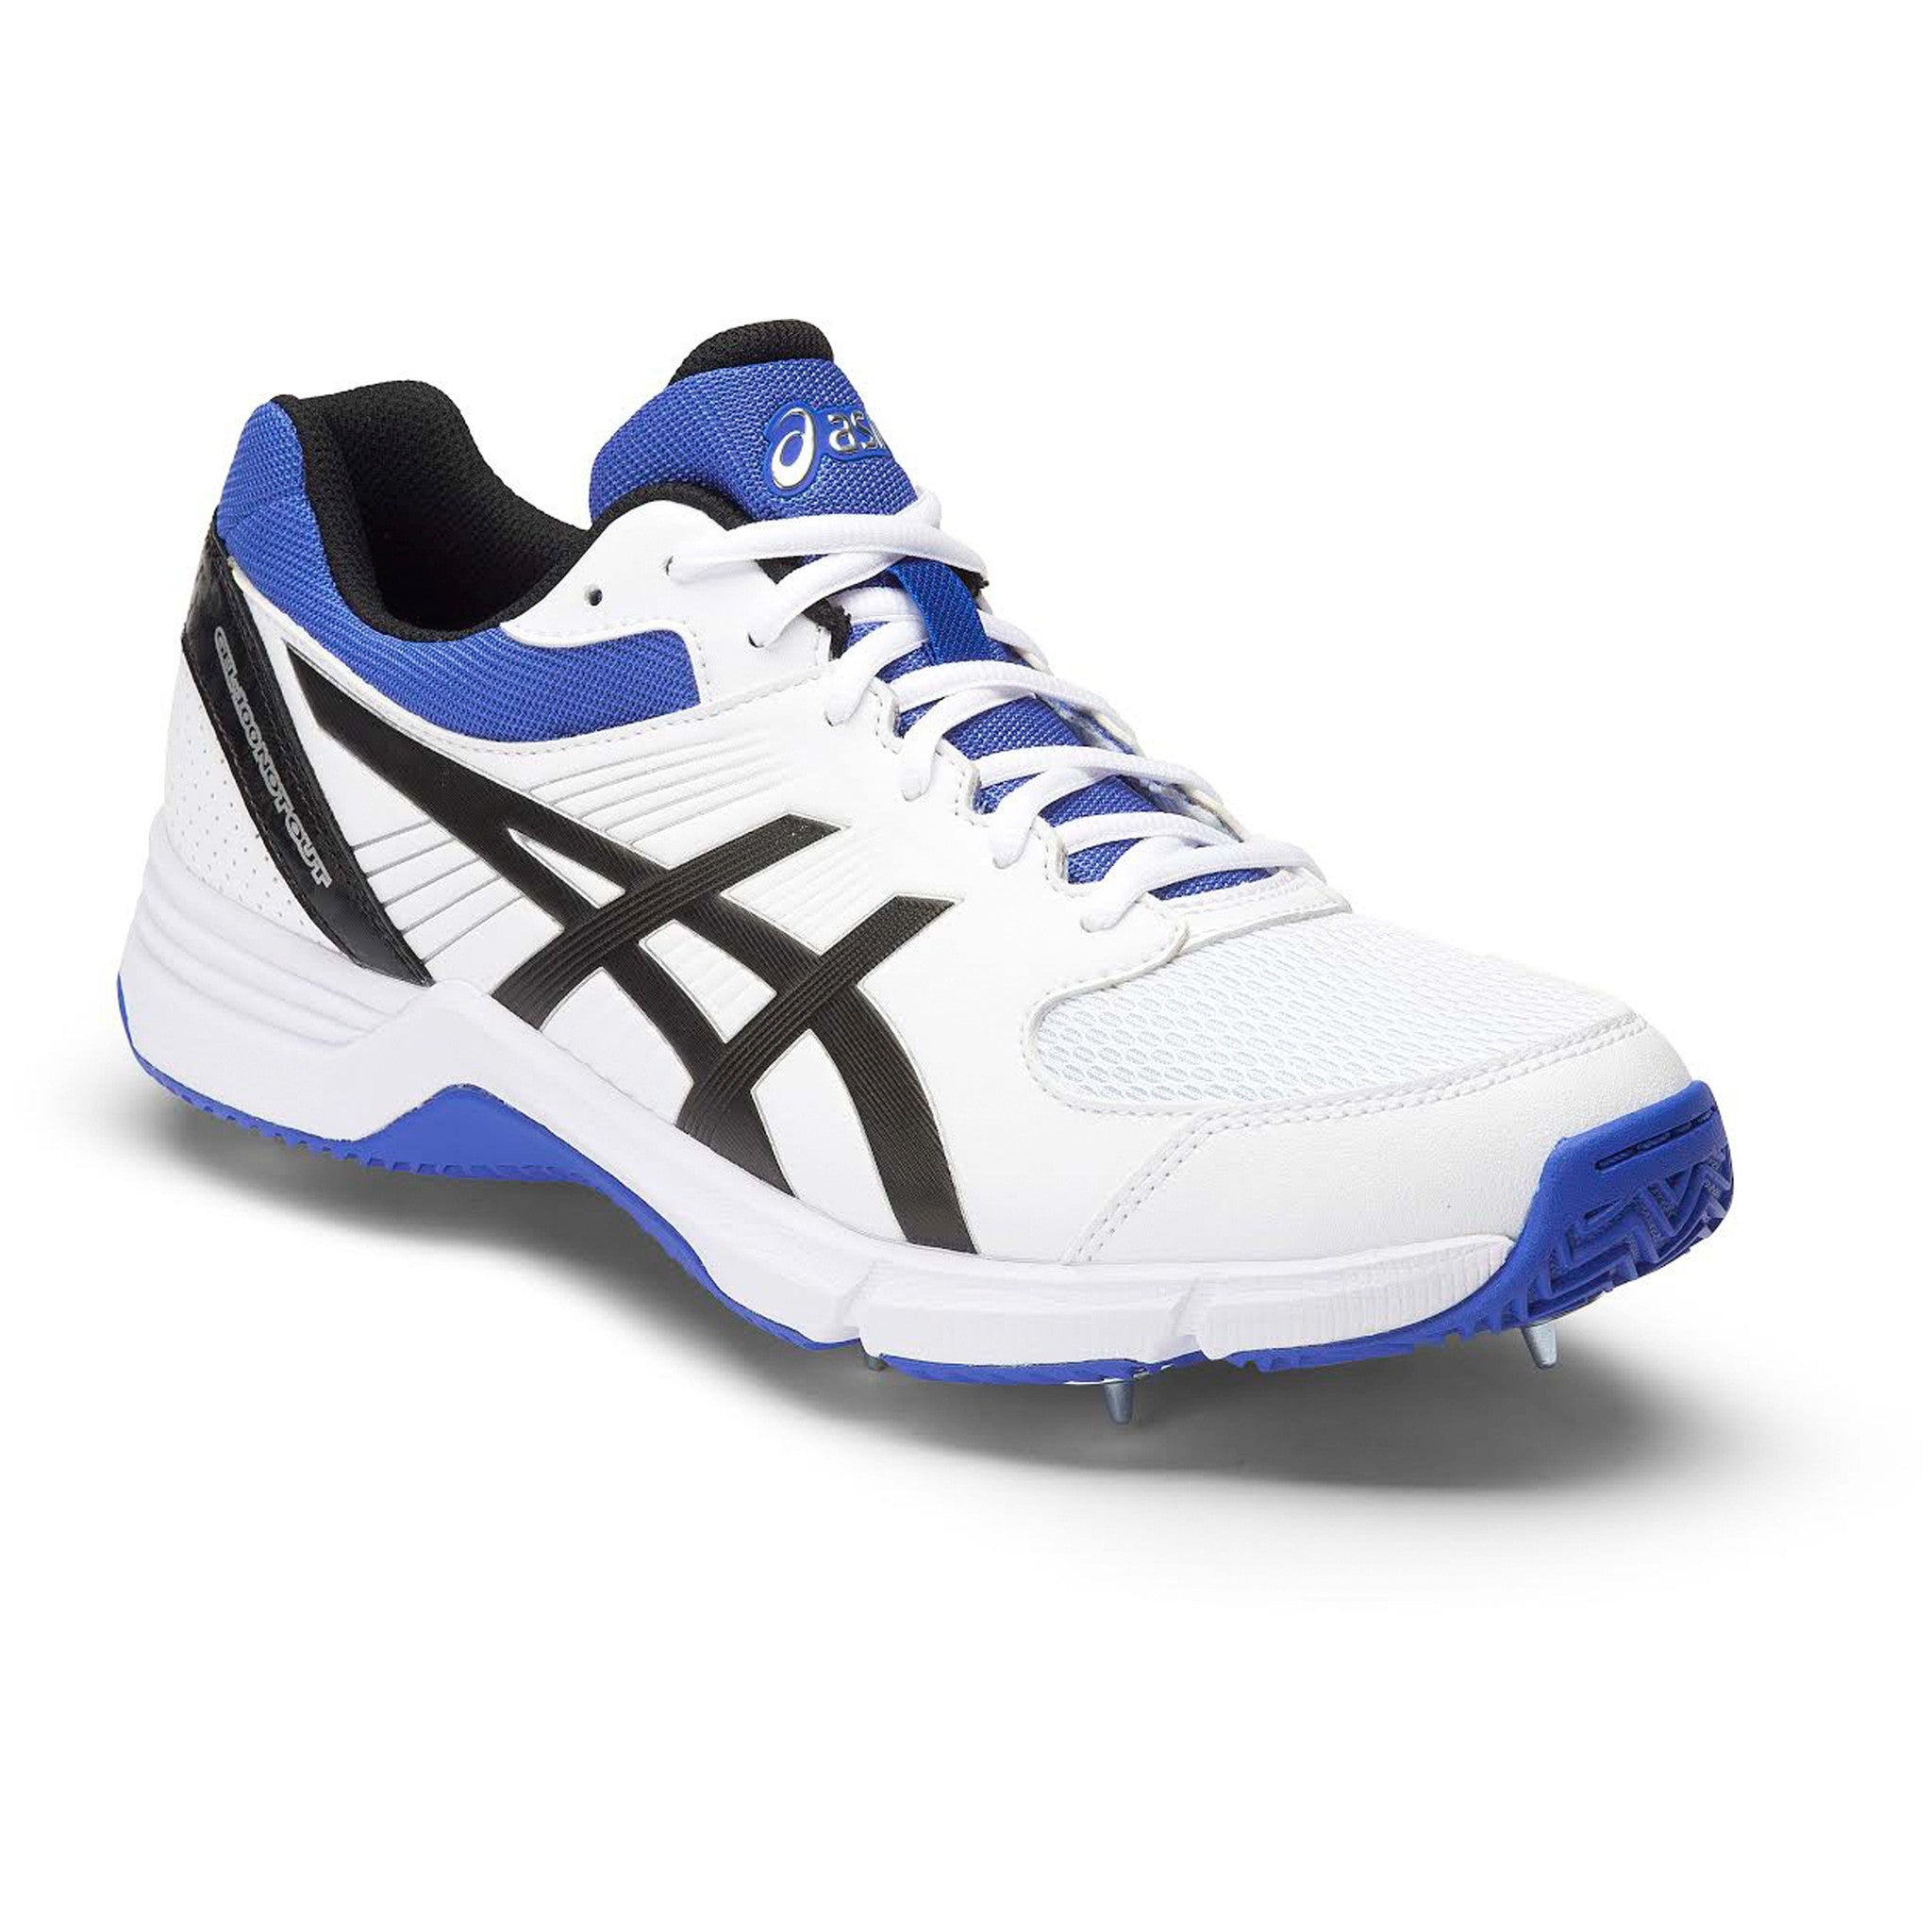 Asics Gel 100 Not Out Cricket Spikes